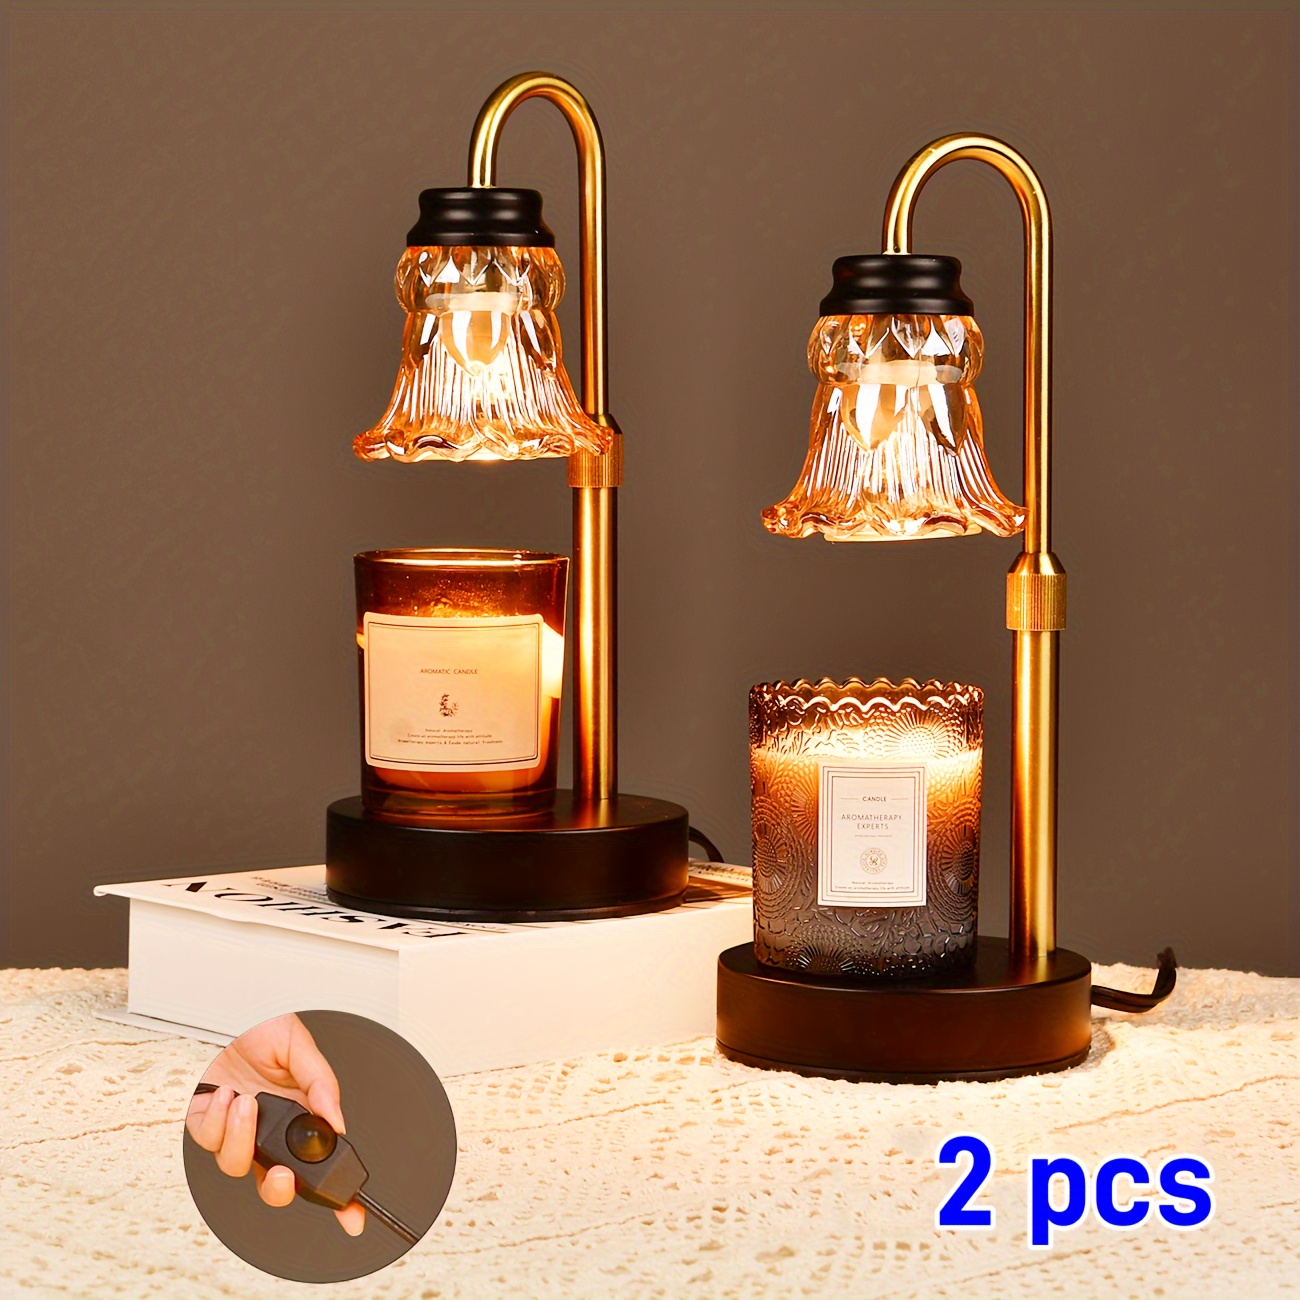 

Jackyled 2packs Candle Warmer Lamp With Dimmer Height Adjustable Candle Lamp Warmer With Heating Bulbs For Scented Candles, Candle Jars, Wax Warmer Heat Lamp For Home Decor, Housewarming Gif